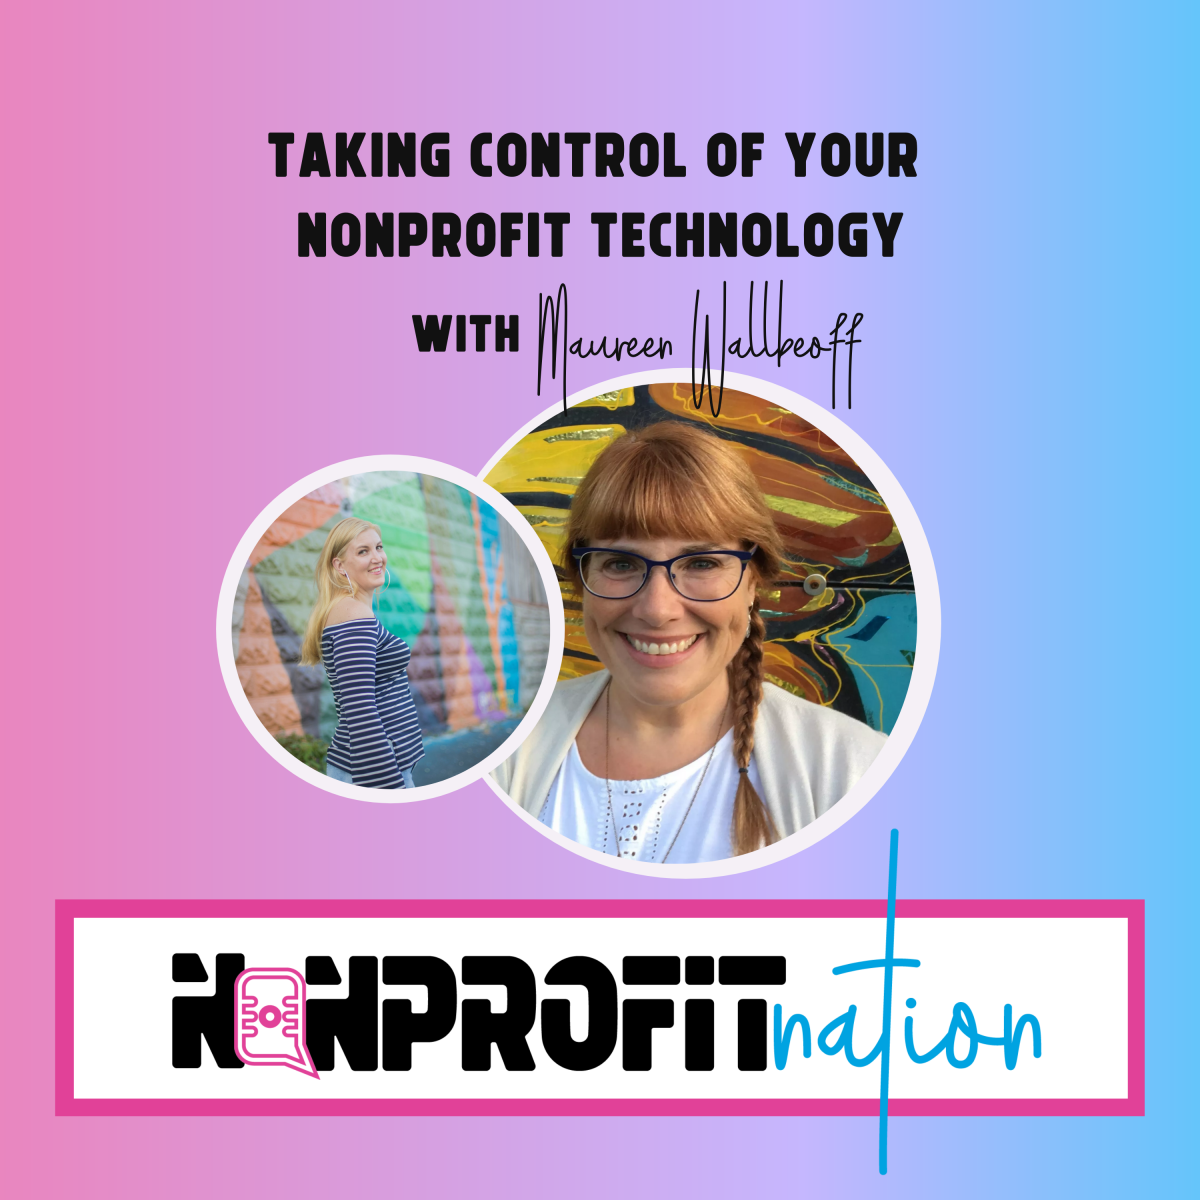 Taking Control of your Nonprofit Technology with Maureen Wallbeoff